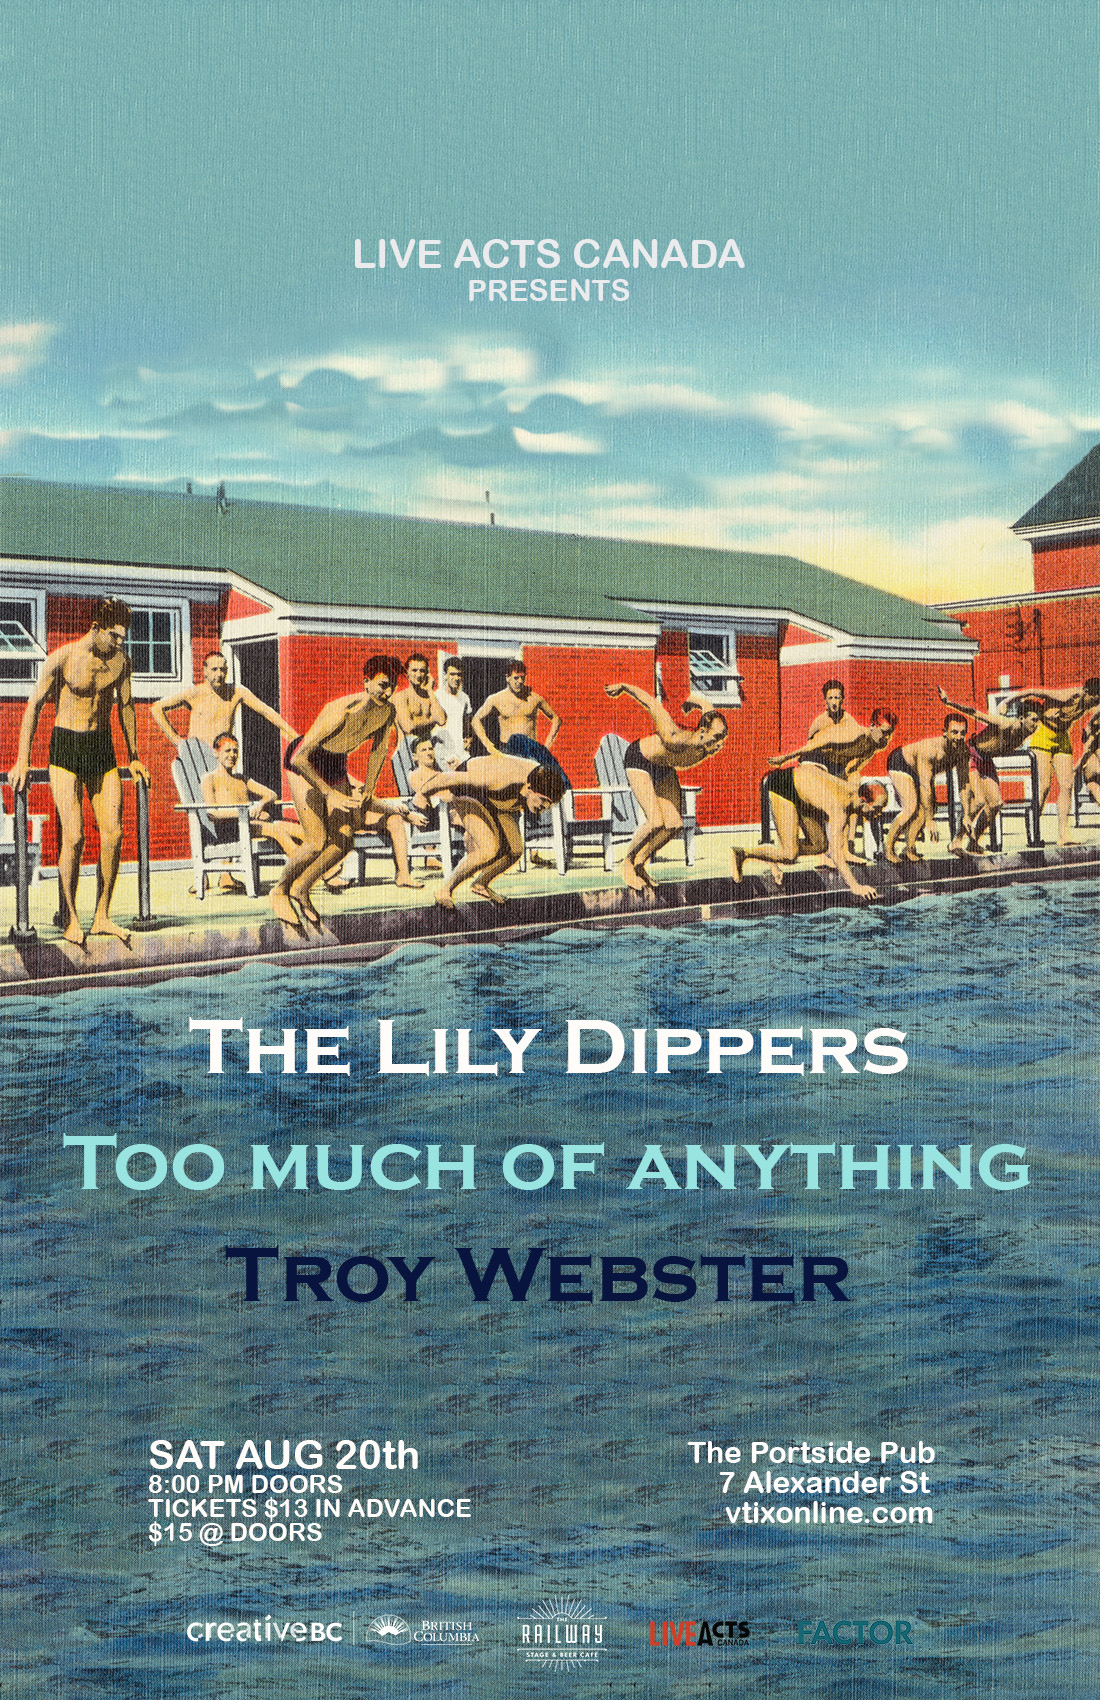 The Lily Dippers with Special Guests Too Much of Anything and Troy Webster